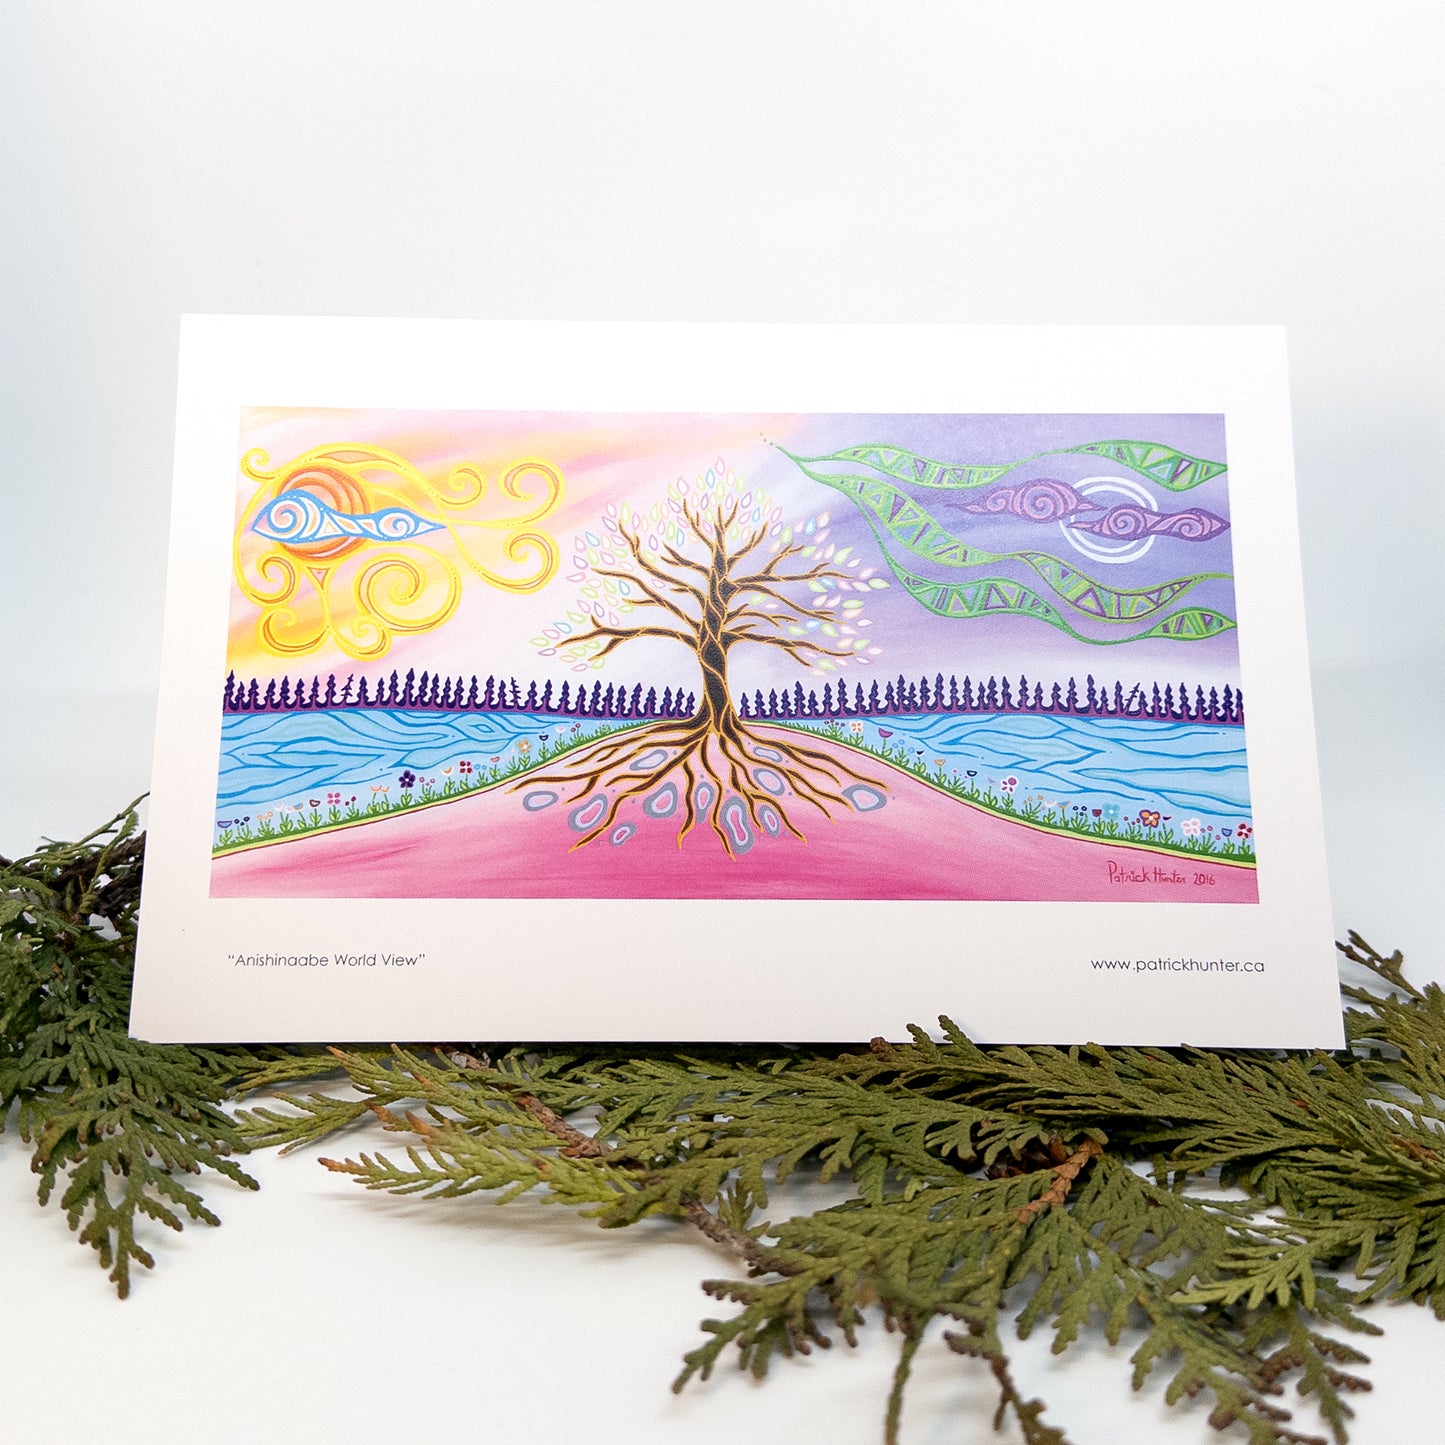 A greeting card with Patrick Hunter's Anishinaabe World View painting in woodland art style is displayed on some cedar boughs.